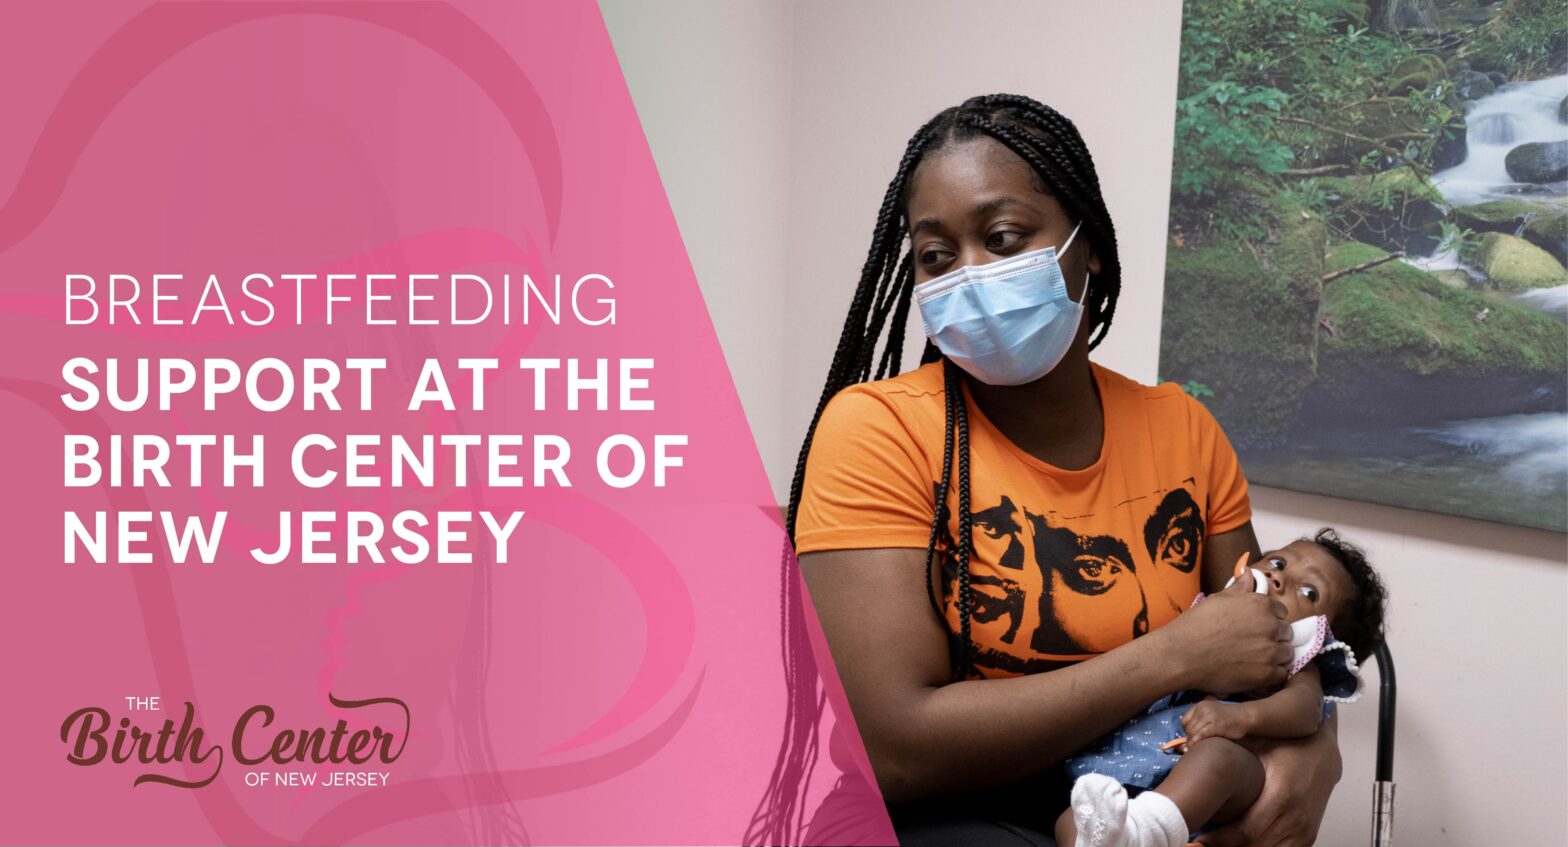 Breastfeeding Support at the Birth Center of New Jersey